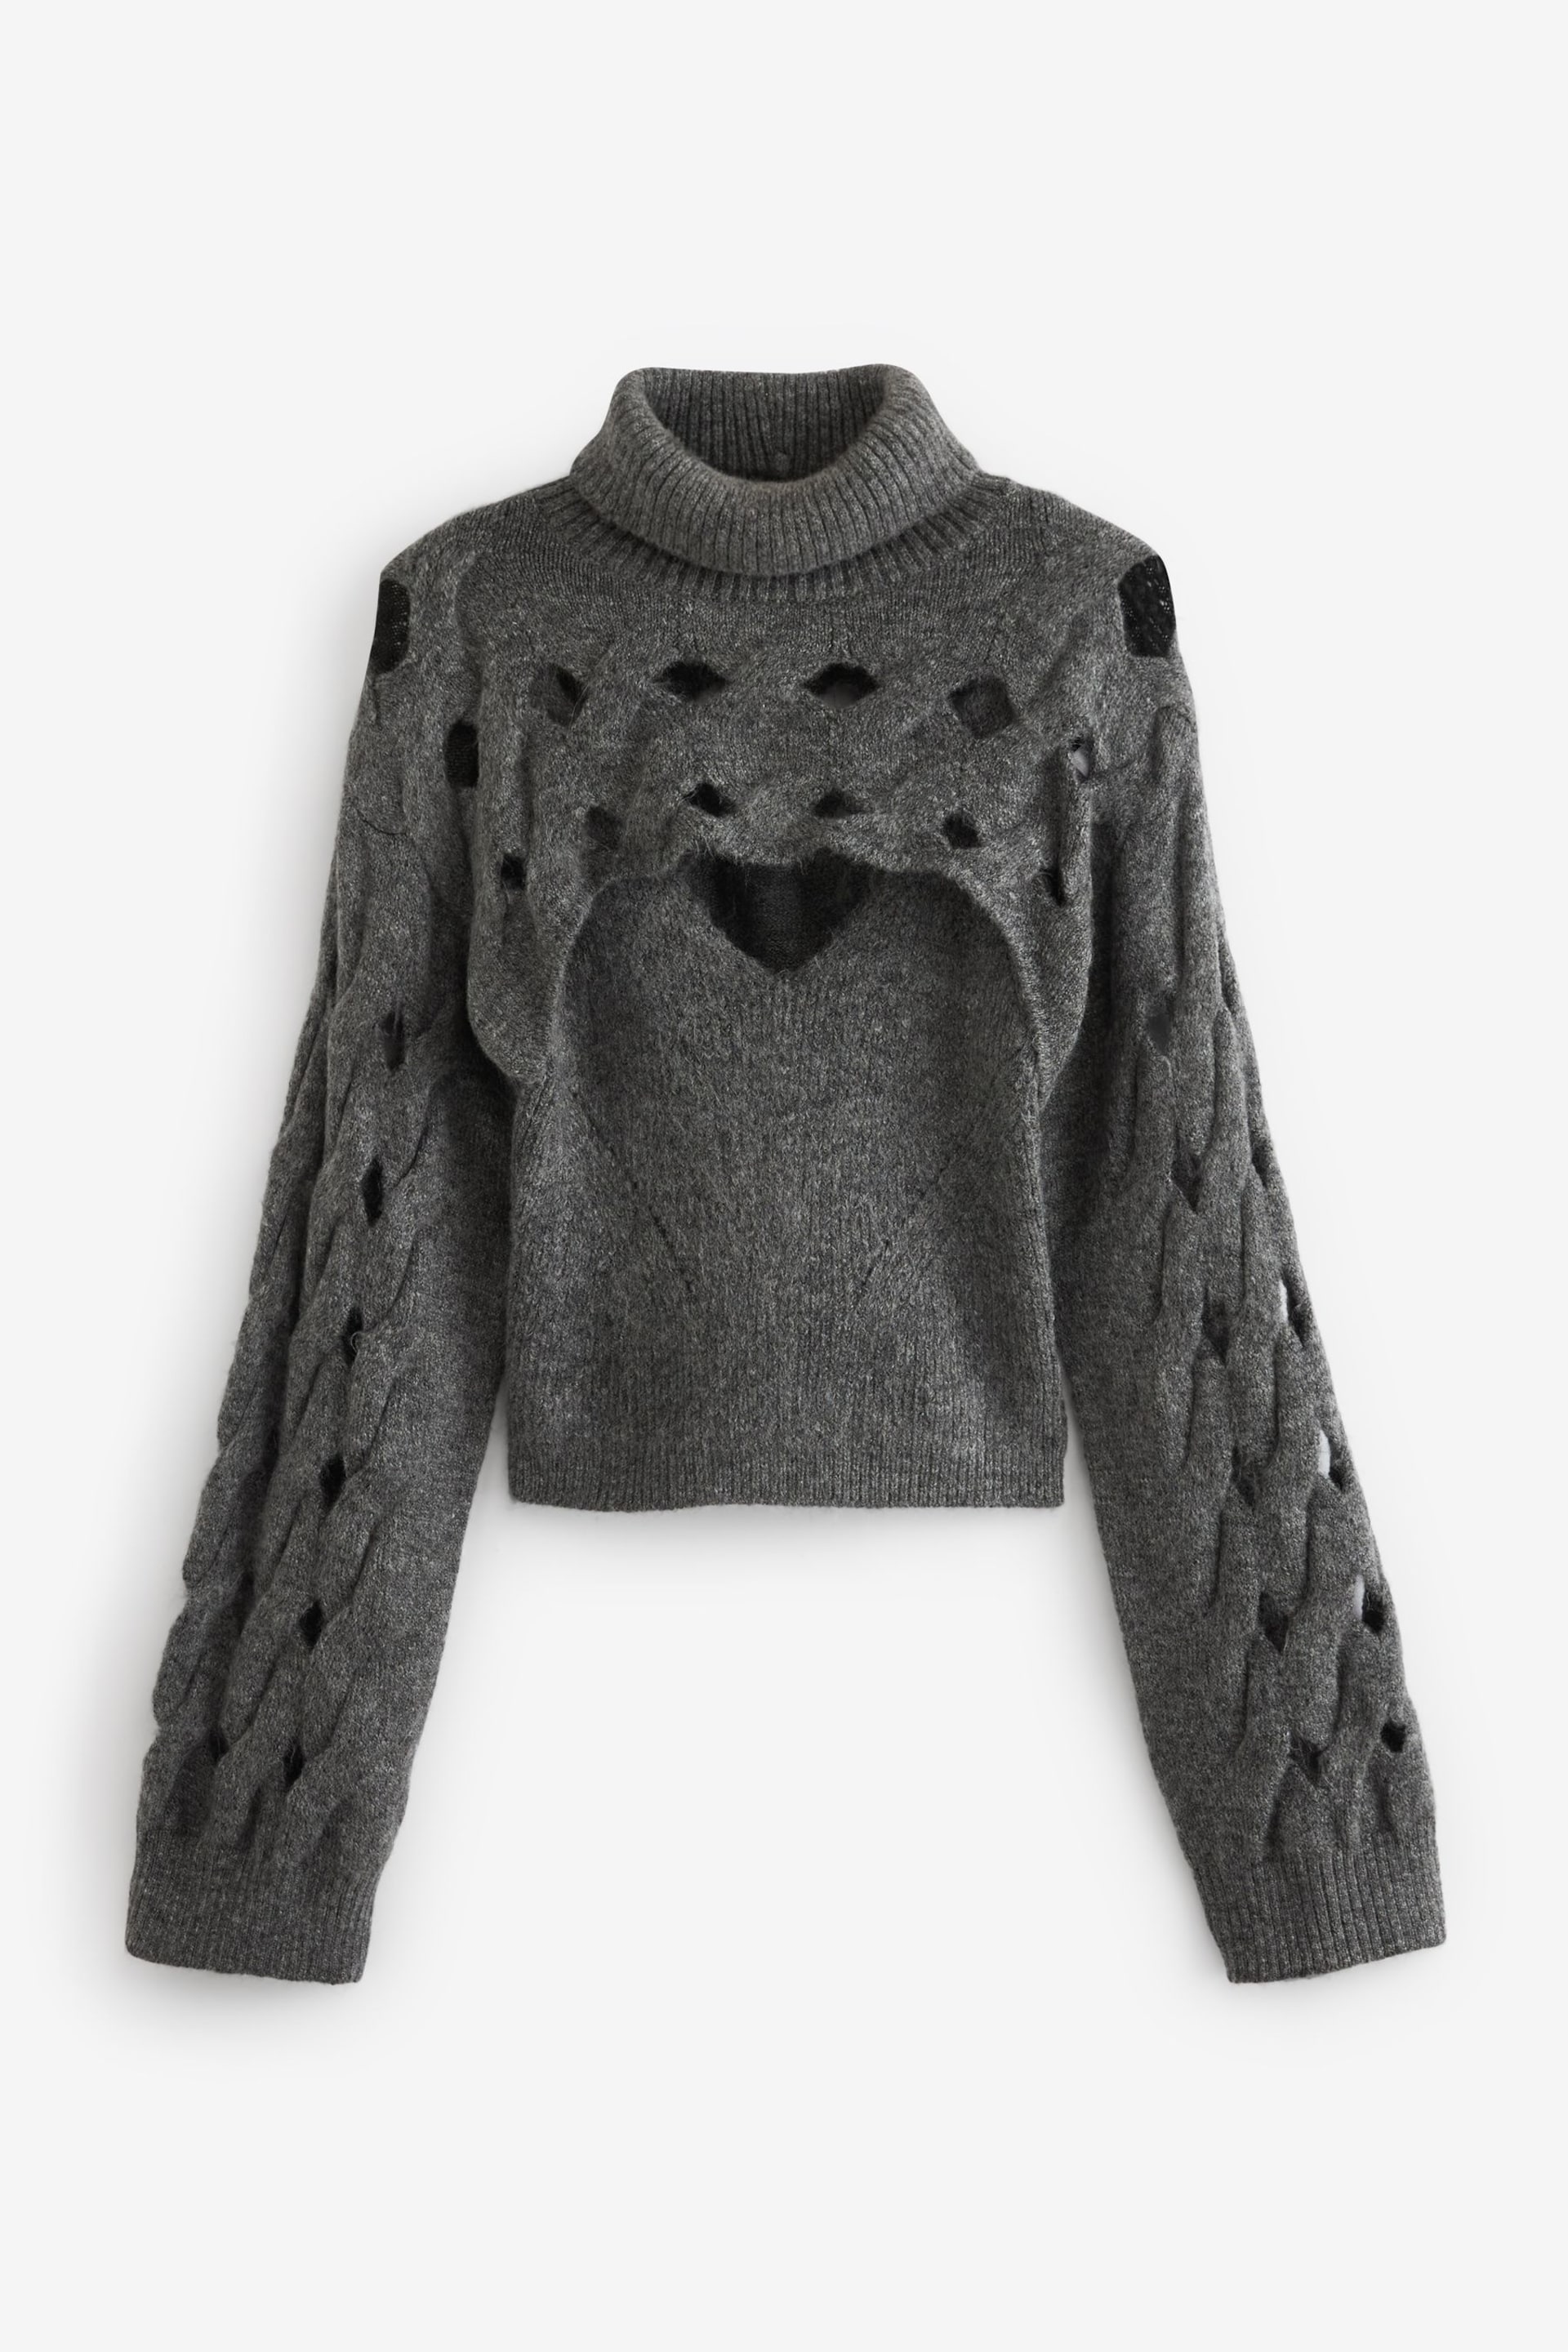 Charcoal Grey 2 In 1 Open Stitch Vest and Roll Neck Cropped Shrug Jumper - Image 5 of 8